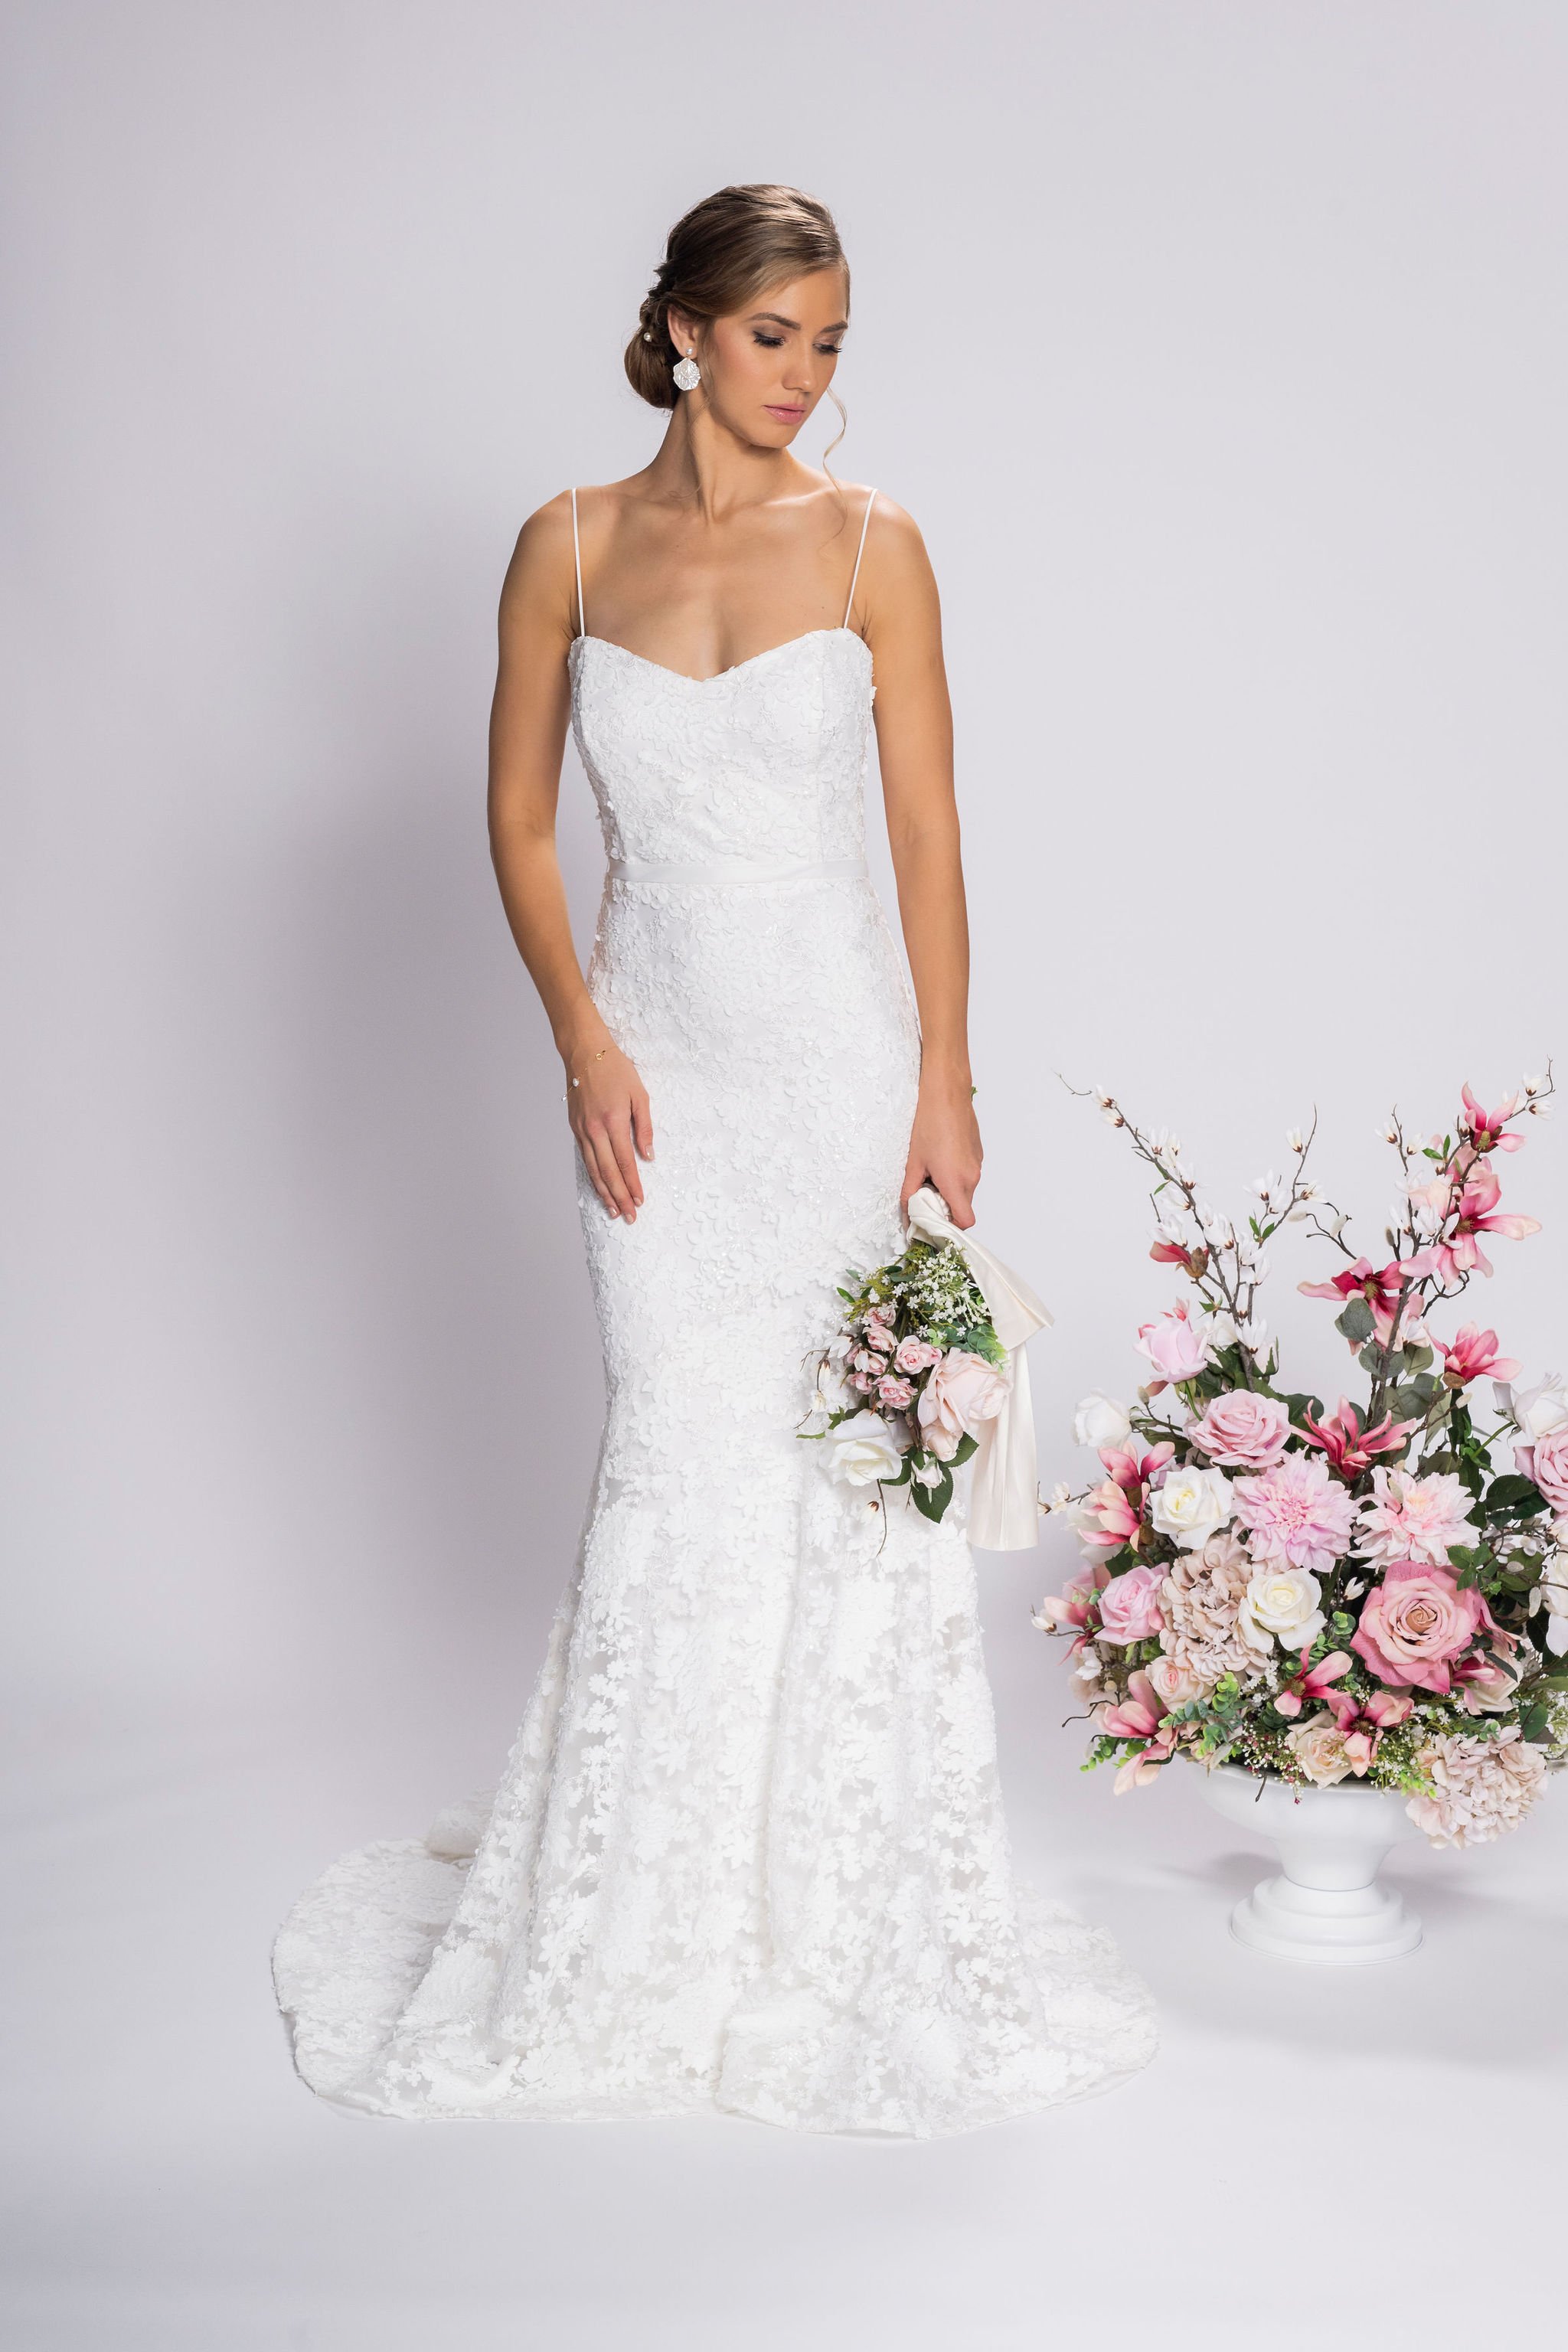 Most Pinned Wedding Dresses: 18 Gowns + FAQs